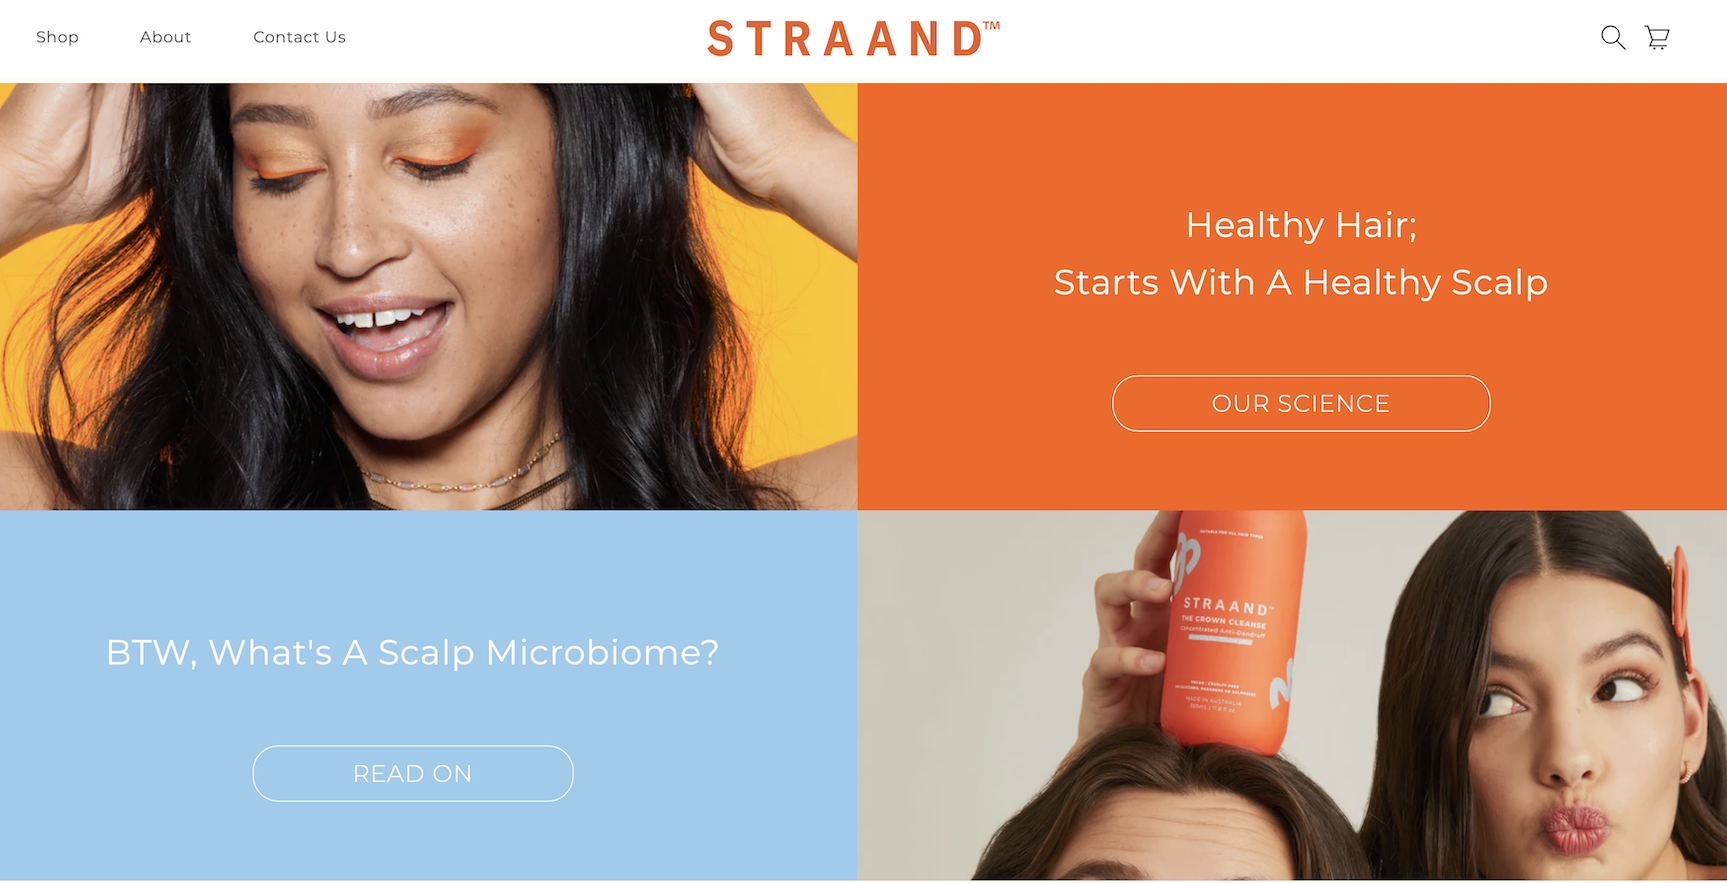 Unilever Ventures Has Invested 2 Million USD in the Australian Natural Hair Care Brand Straand